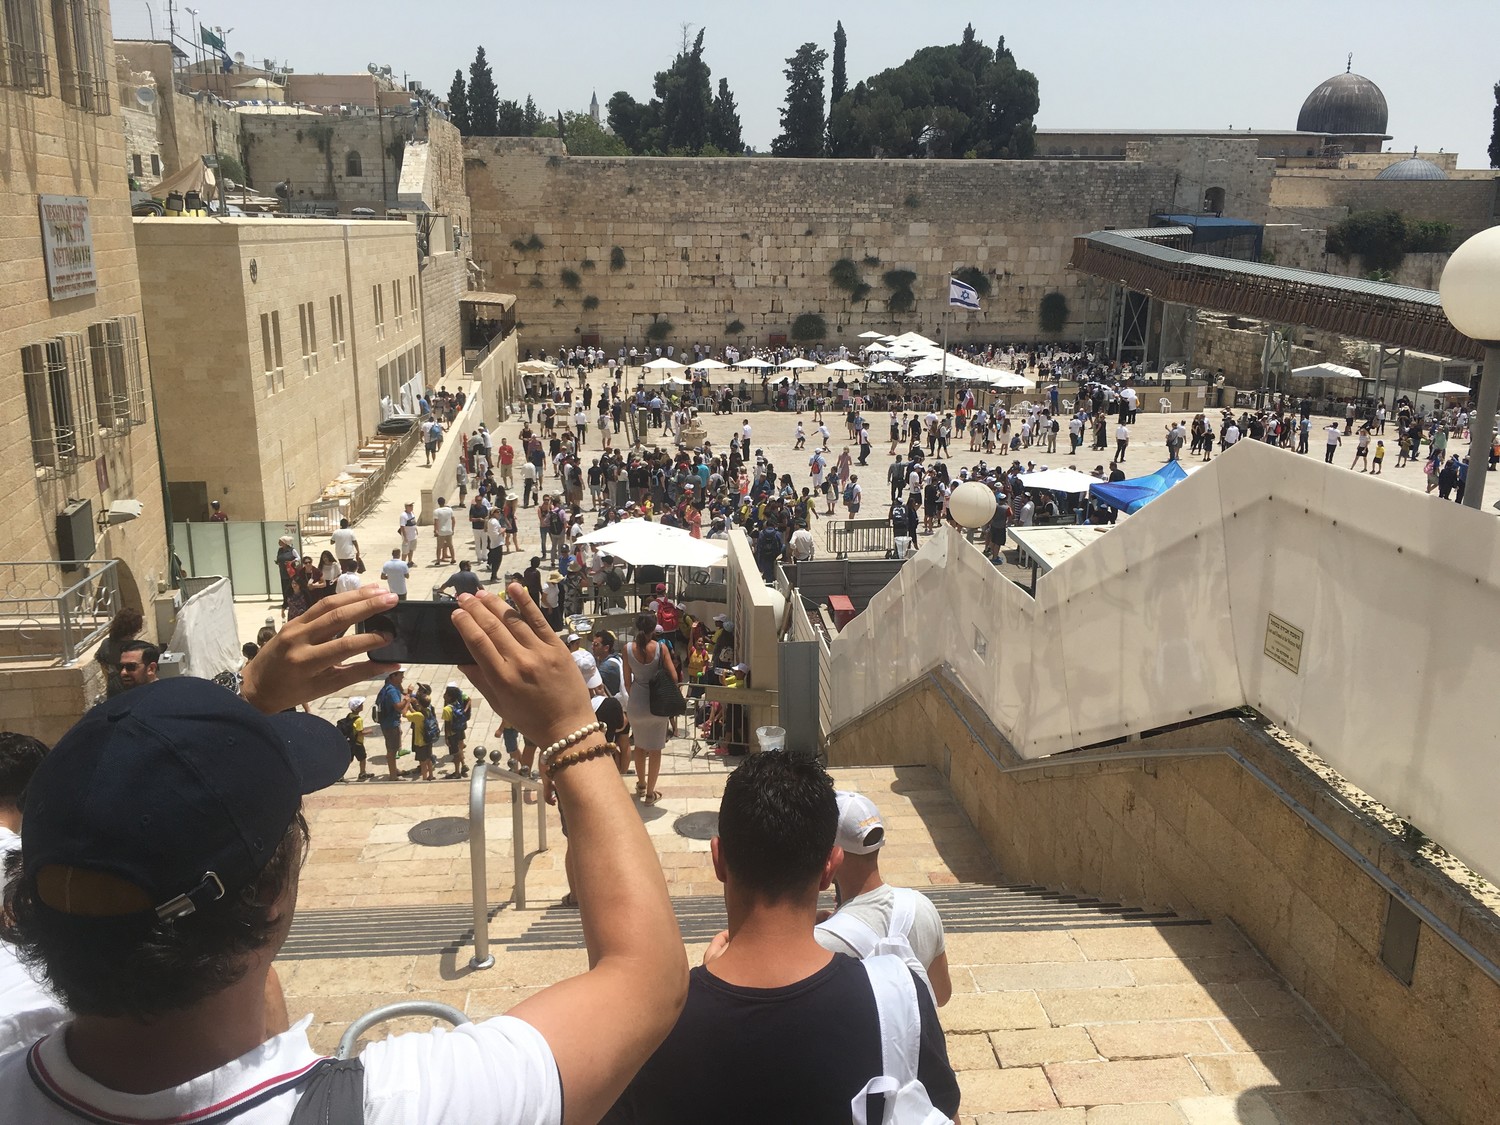 Tourists enter the Kotel plaza, as Jews pray at the holy site.